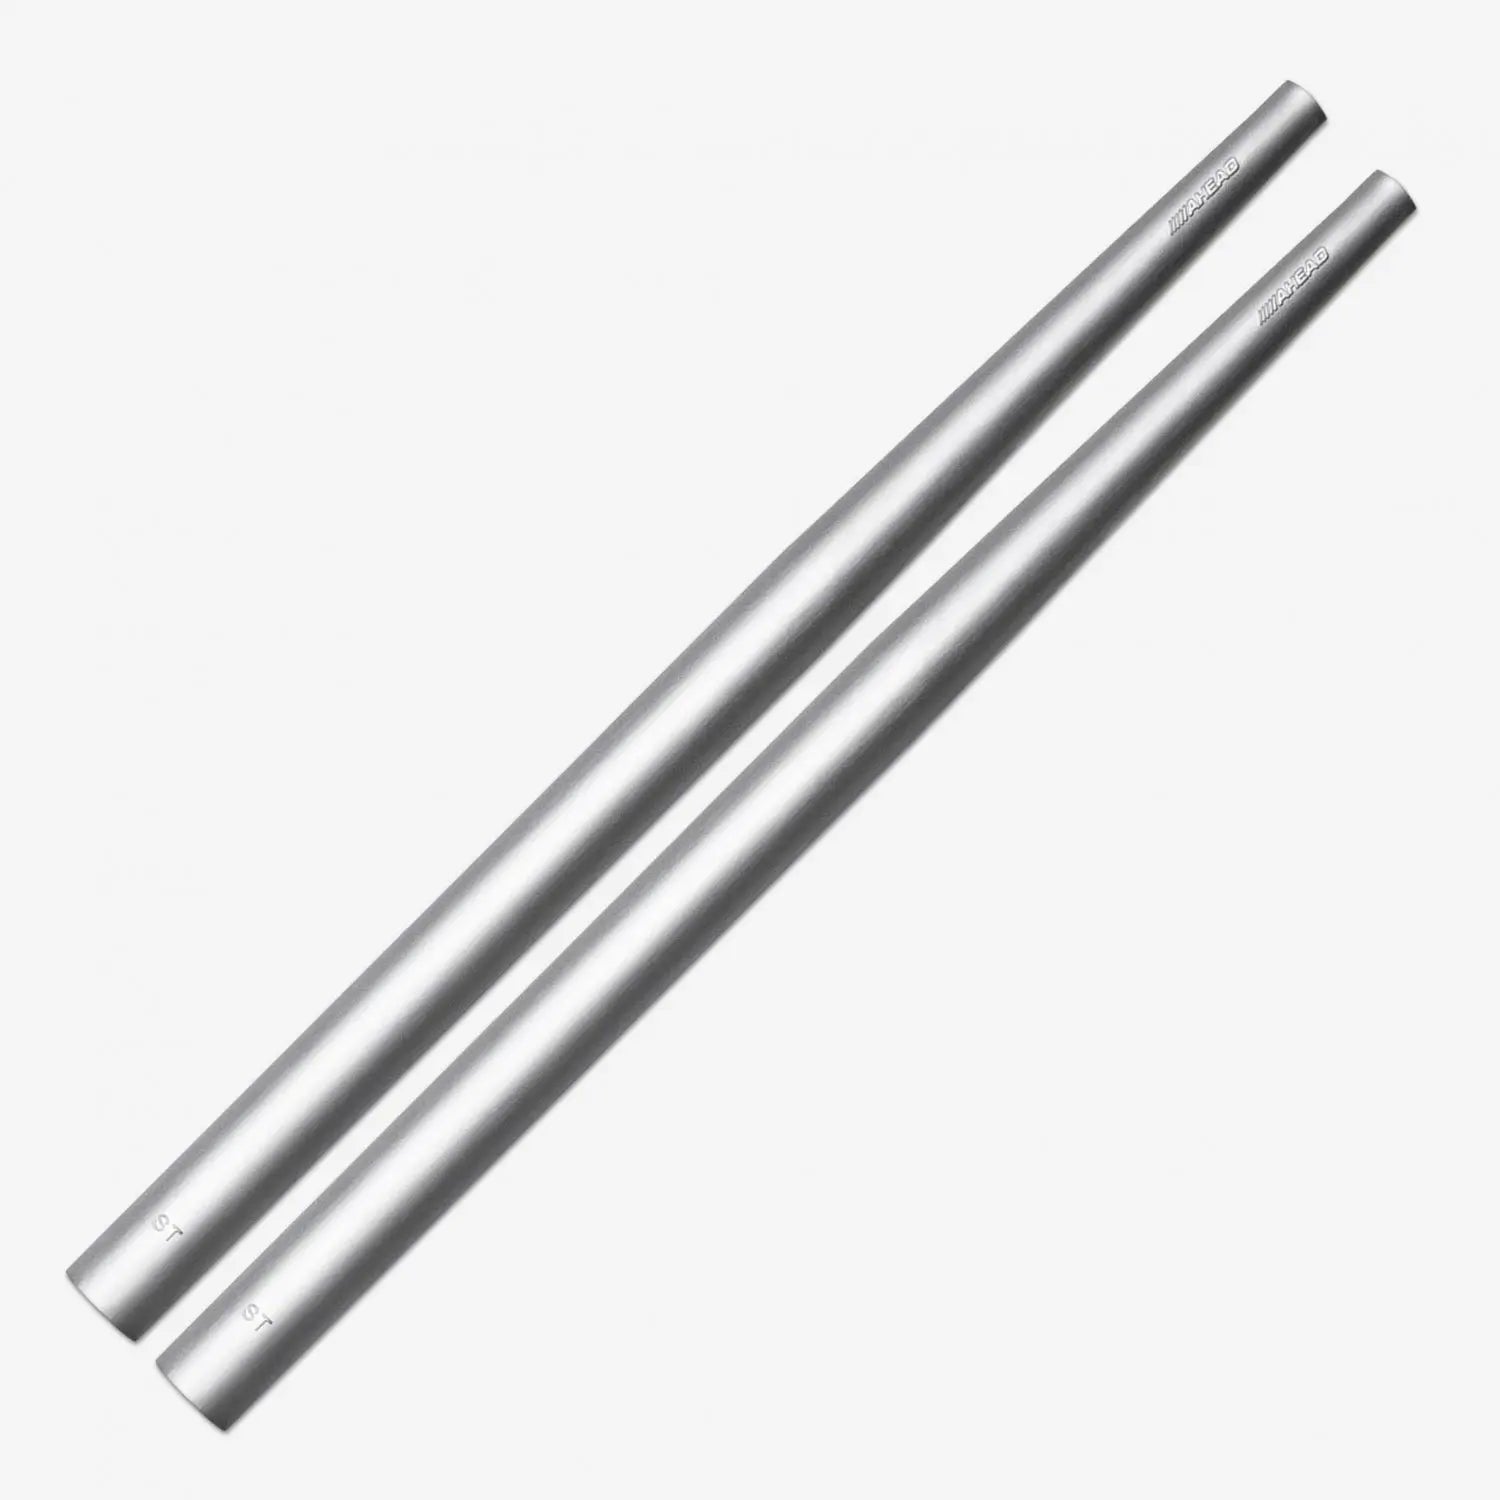 Ahead Short Taper Drumstick Covers - Silver, Pair (STS) DRUM STICKS Ahead 